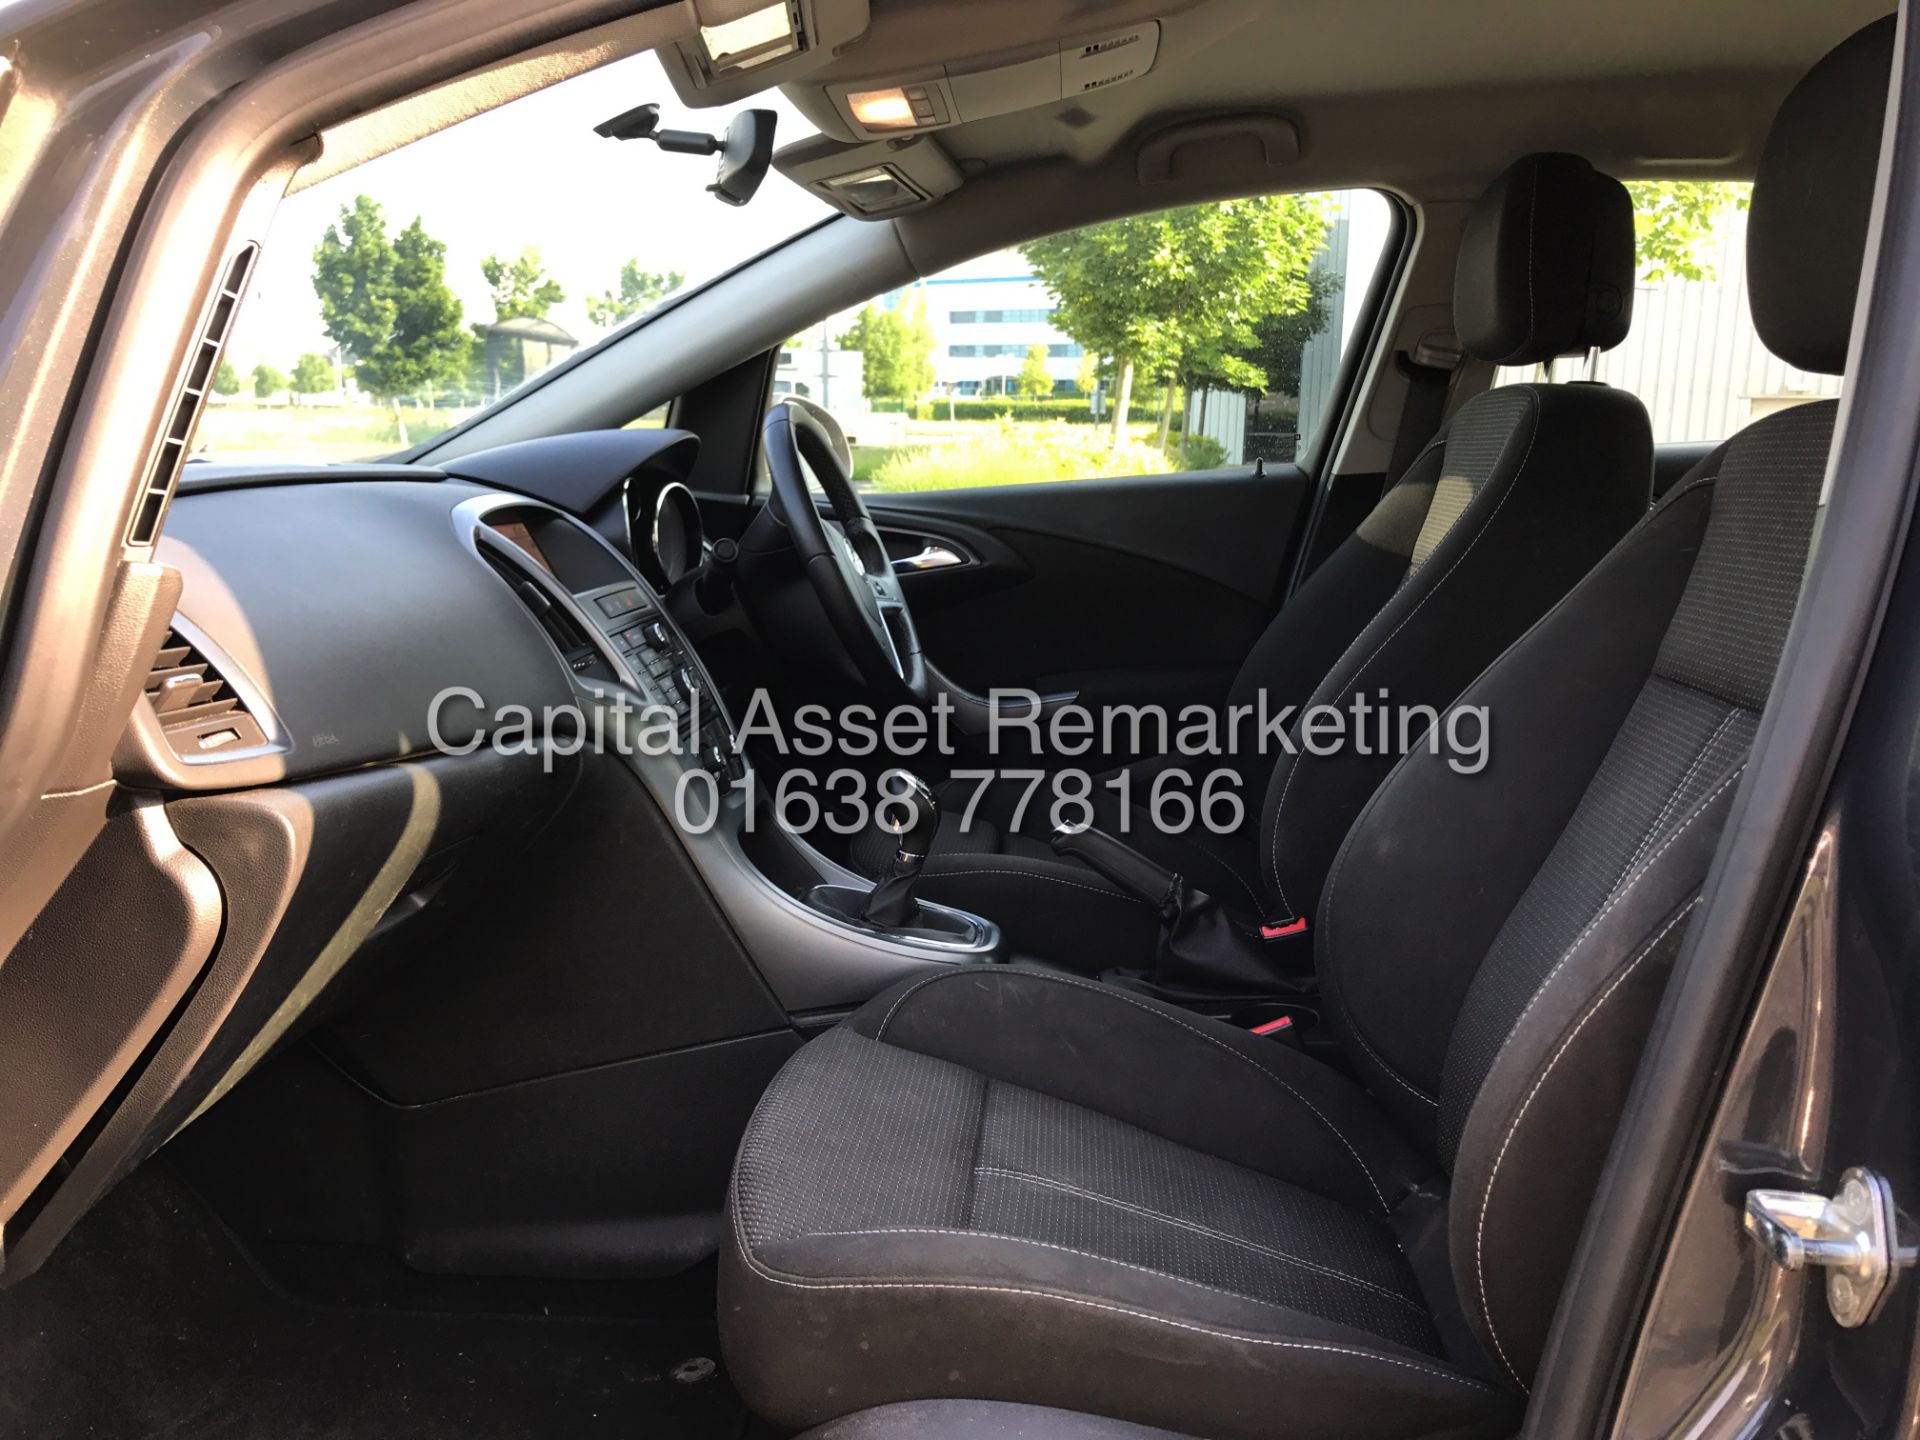 On Sale VAUXHALL ASTRA 1.3CDTI "TECH LINE" ESTATE (2013 MODEL) 1 OWNER WITH HISTORY SAT NAV AIR CON - Image 13 of 20